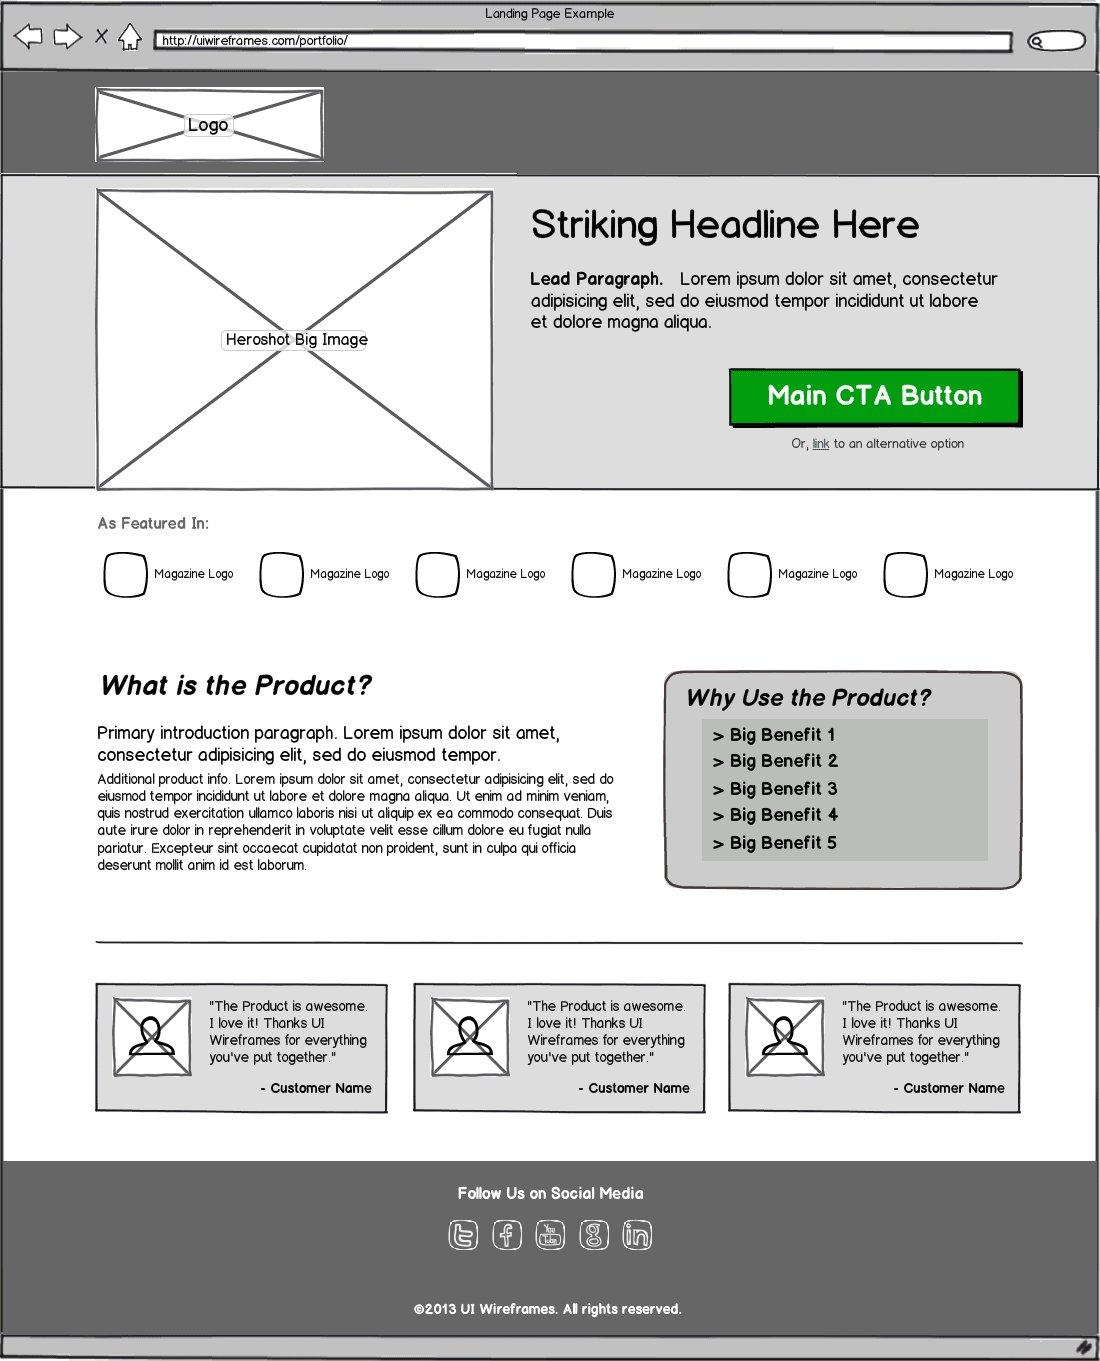 PPC Landing Page Wireframe Example